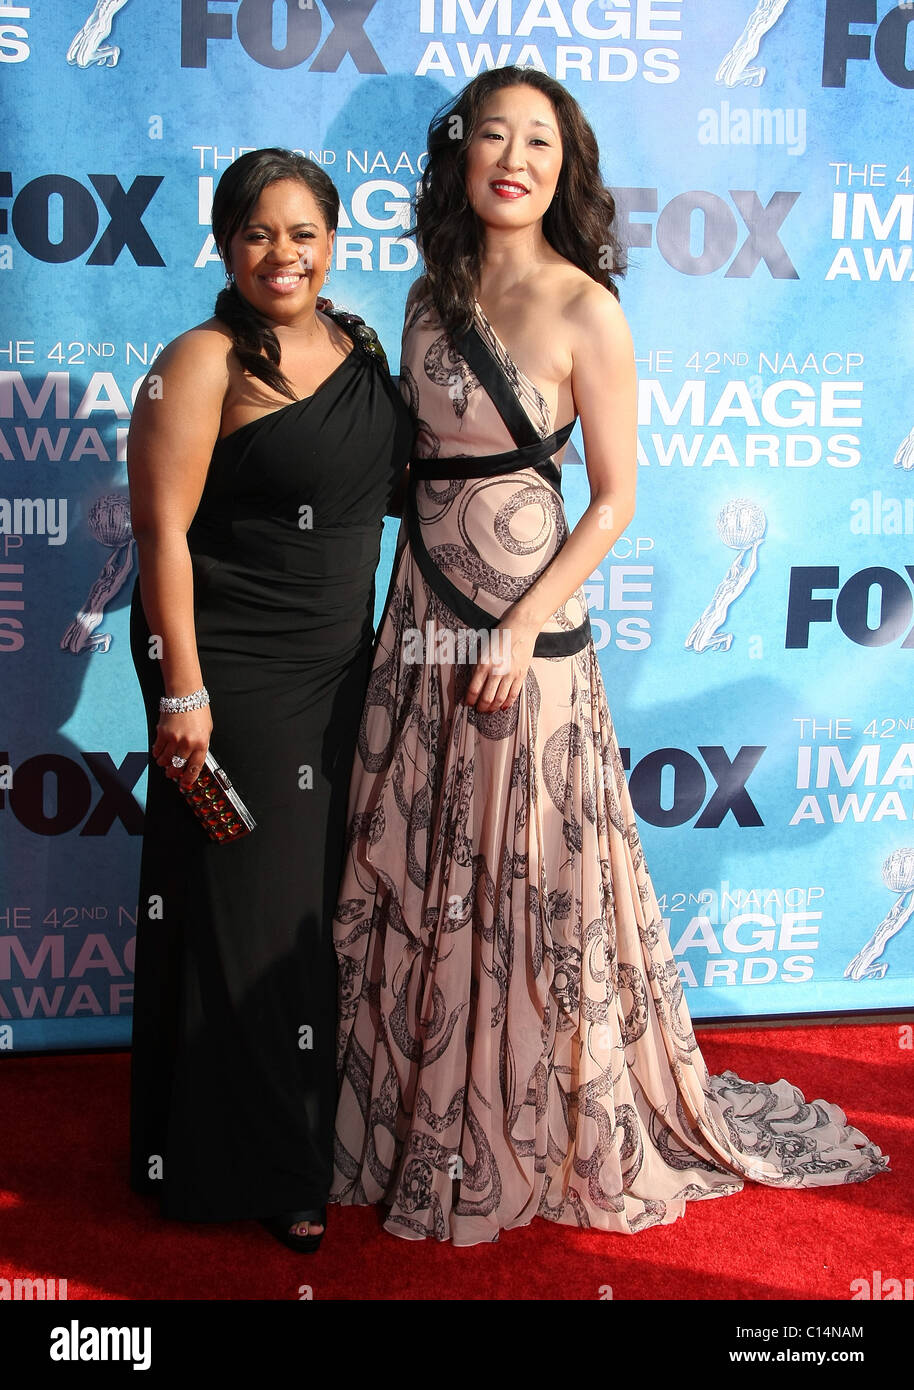 CHANDRA WILSON & SANDRA OH 42ND NAACP IMAGE AWARDS ARRIVALS DOWNTOWN LOS ANGELES CALIFORNIA USA 04 March 2011 Stock Photo